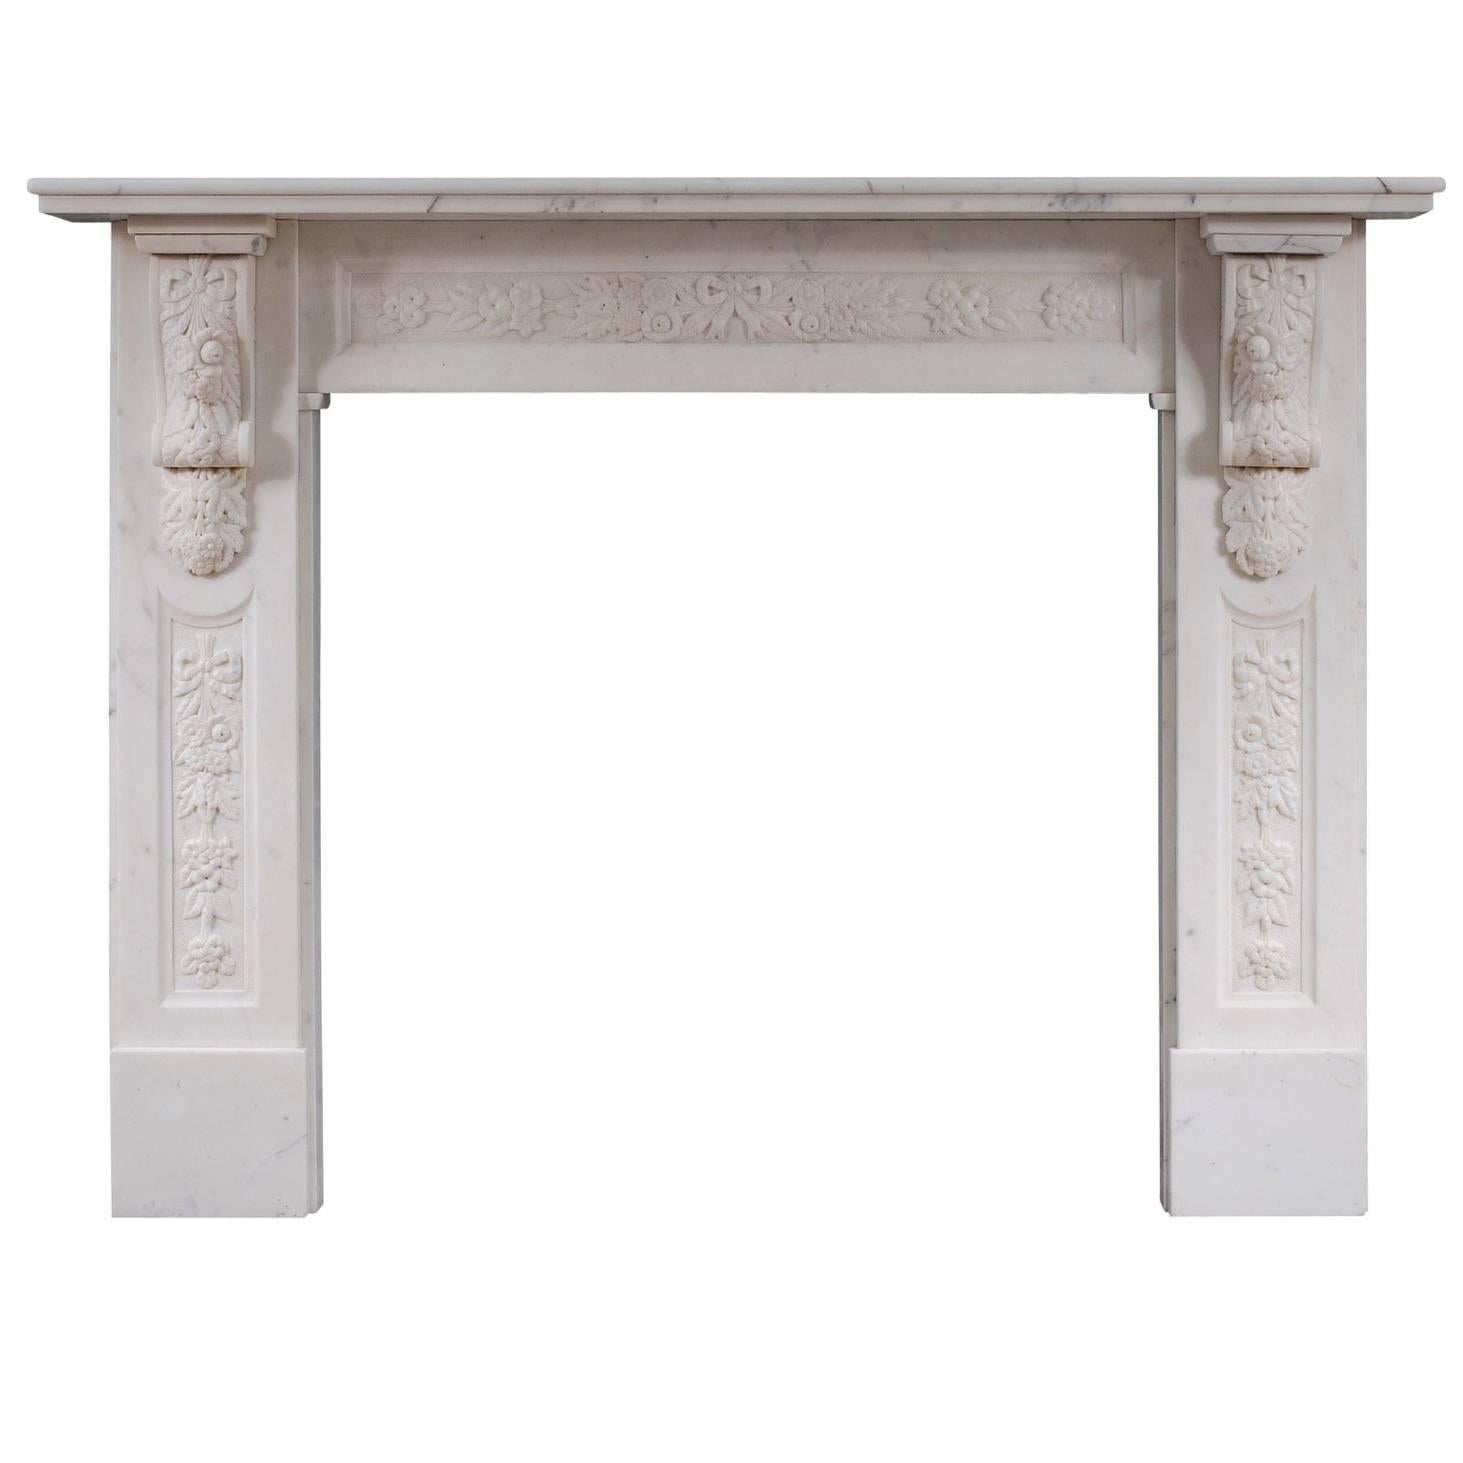 Early Victorian English Statuary Marble Fireplace